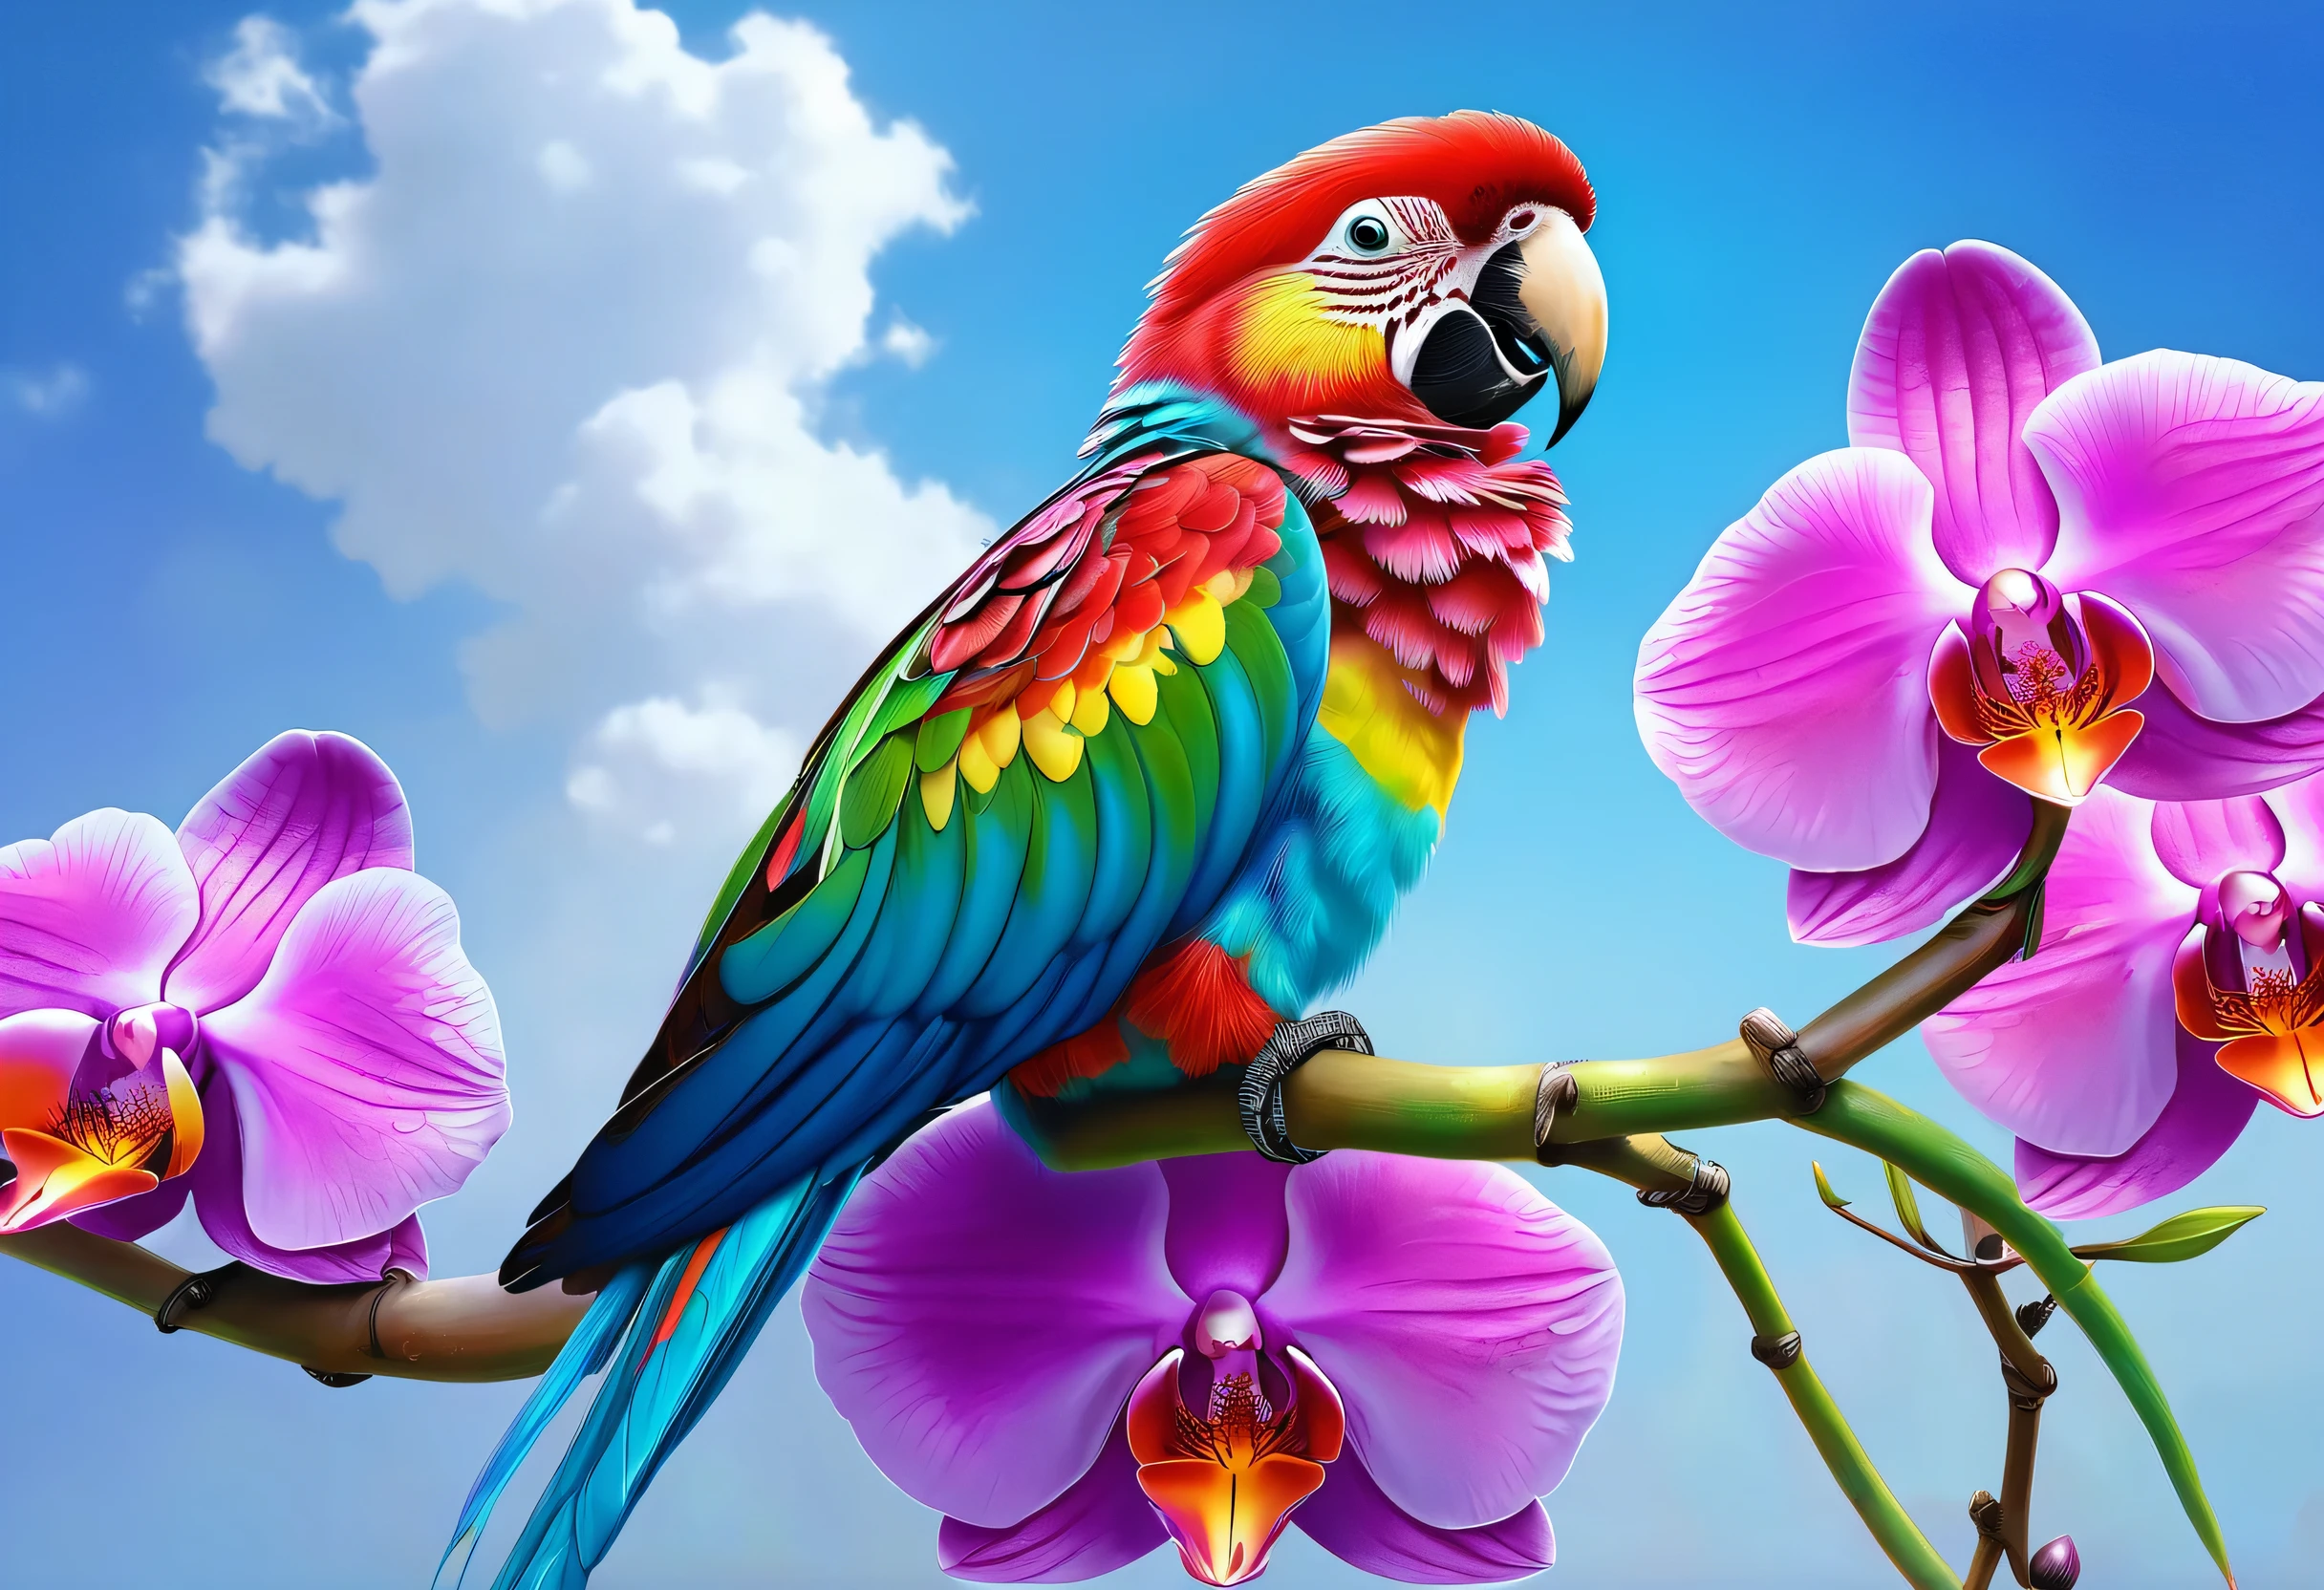 Against the blue sky、Brightly colored parrot perched on a pink orchid branch, Airbrush paintings inspired by Charles Bird King, CG society hot topic, Psychedelic Art, colorful hd images, Colourful and detailed, beautiful and colorful, beautiful colorful, Multicolored birds, Detailed painting 4k, High definition color, Vivid and rich colors, Beautiful bright colors